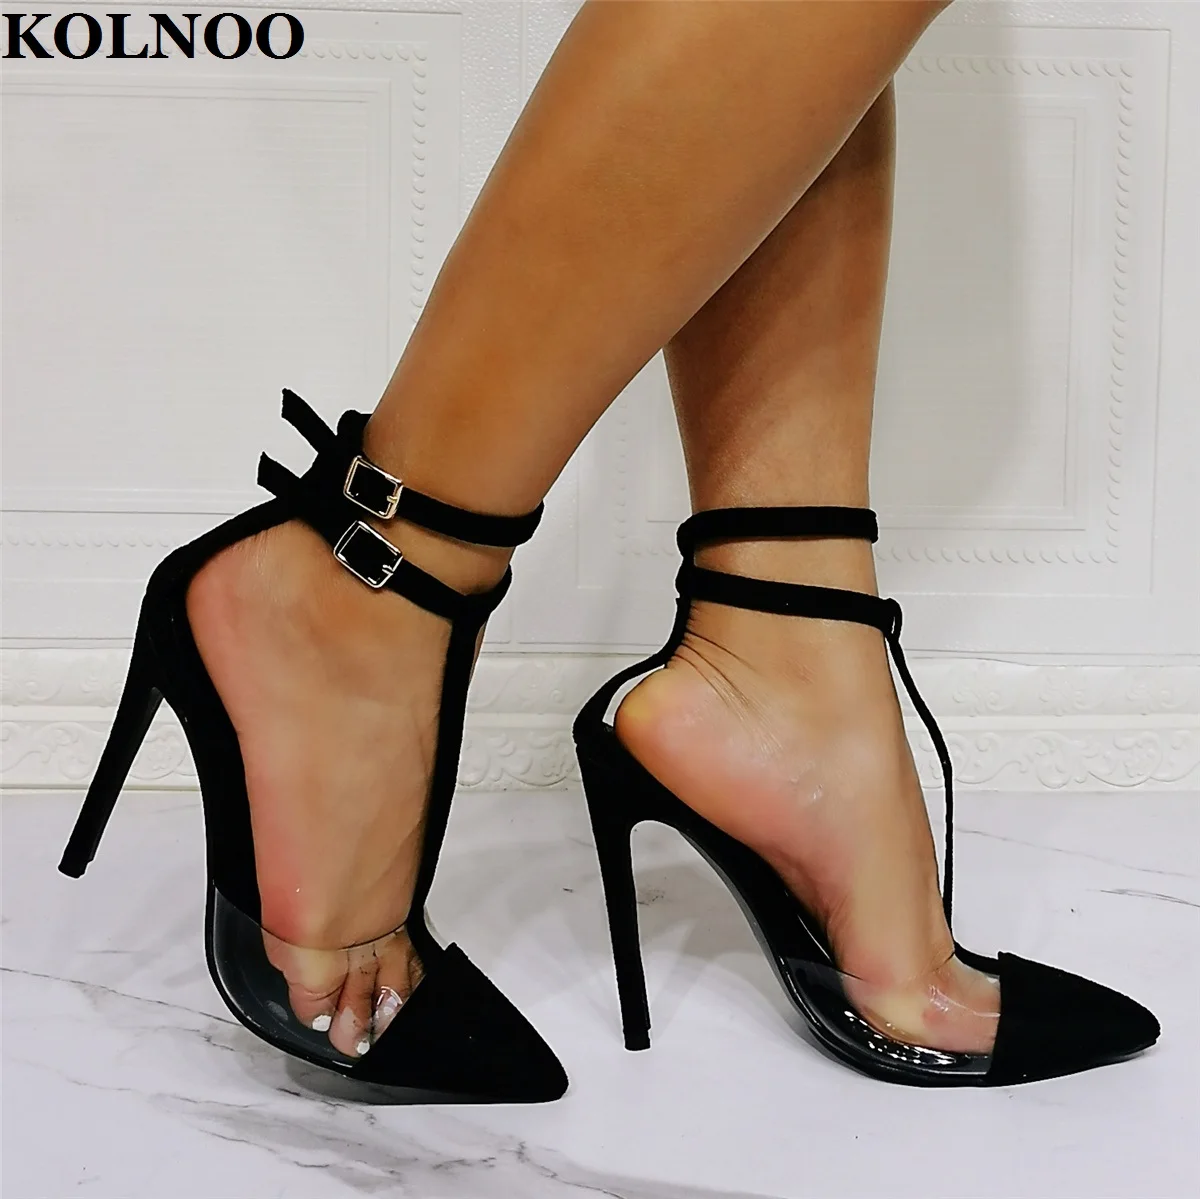 

KOLNOO Handmade Real Photos Ladies High Heeled Sandals Double Buckle Straps Kid-Suede PVC Party Prom Fashion Daily Wear Shoes